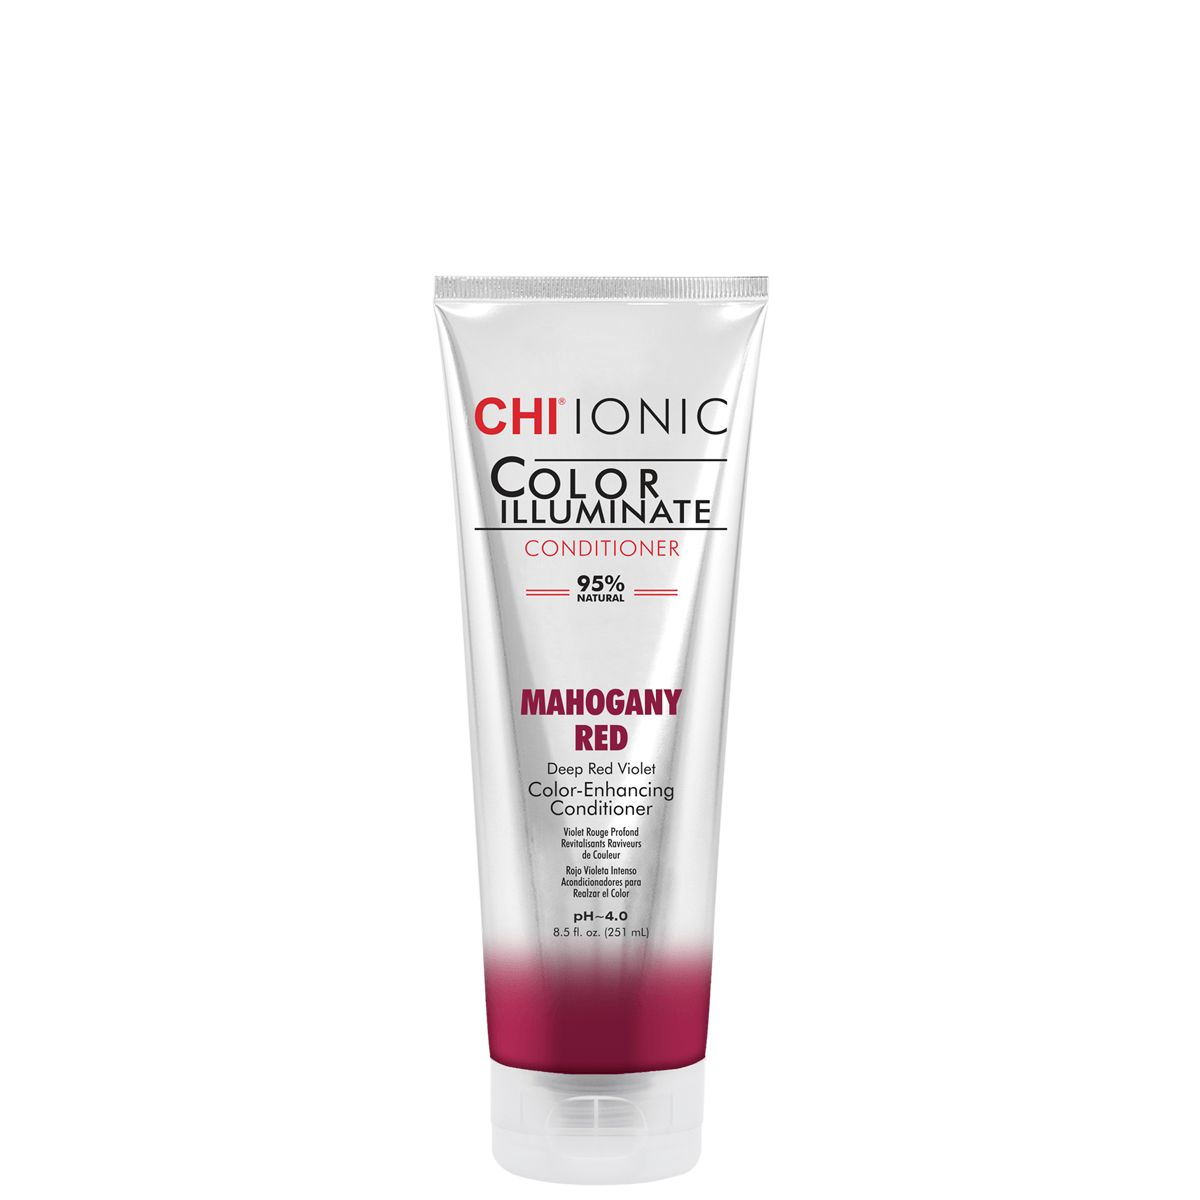 CHI® - IONIC COLOR ILLUMINATE CONDITIONER-MAHOGANY RED - Hair Care Products - Your Hair Shop  - The Best Quality Remy Hair wefts, and shop the best quality remy hair Extensions at Your Hair Shop.